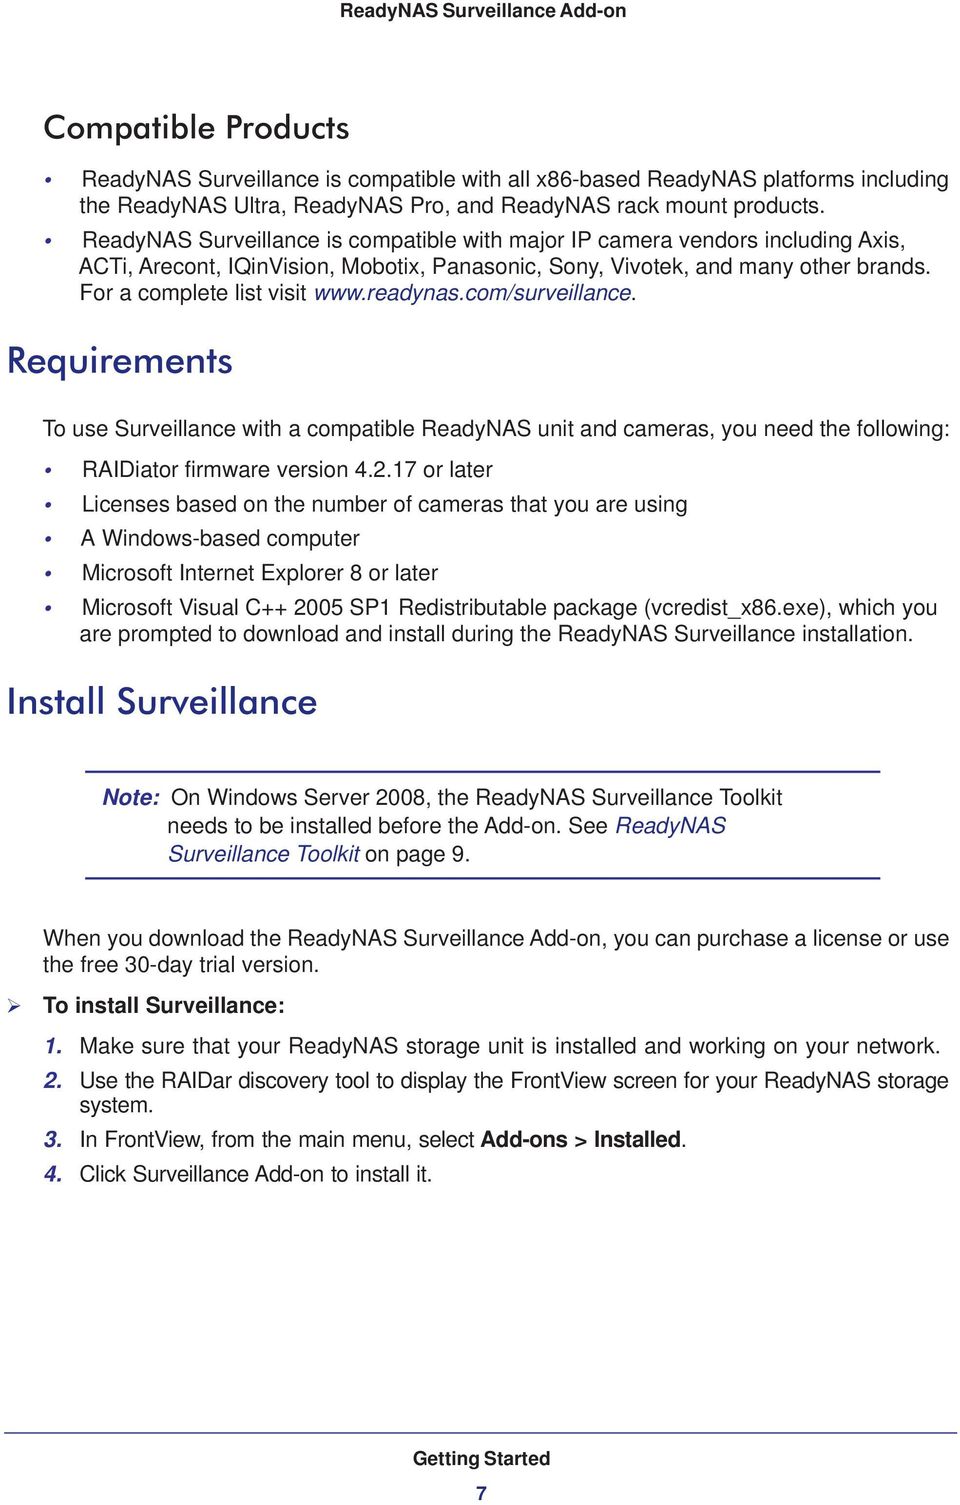 readynas.com/surveillance. Requirements To use Surveillance with a compatible ReadyNAS unit and cameras, you need the following: RAIDiator firmware version 4.2.